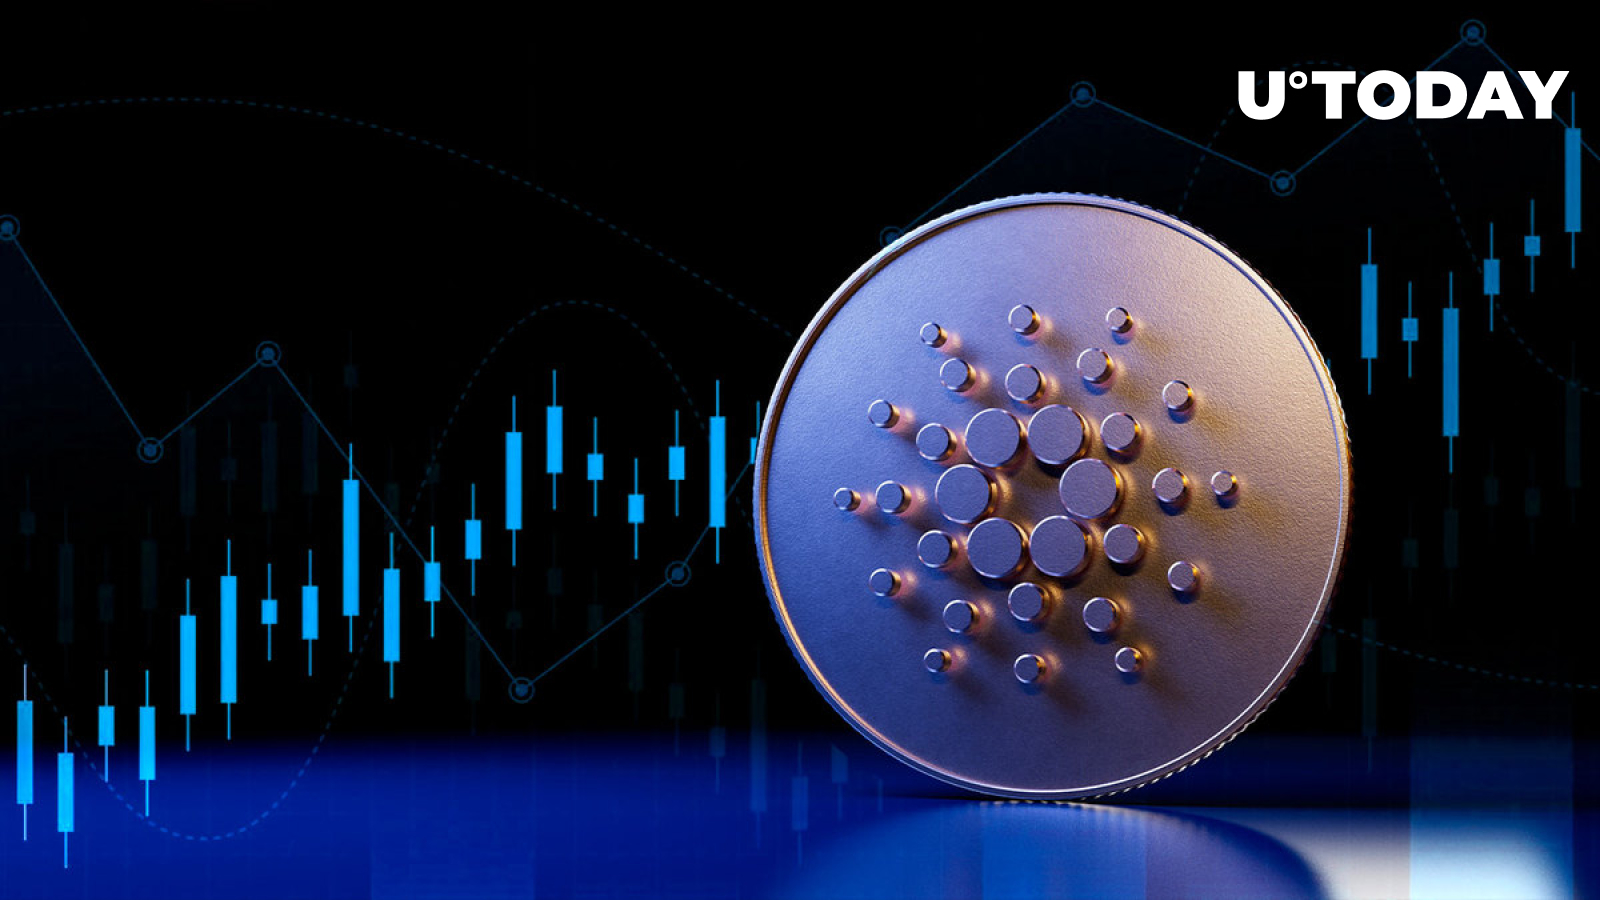 Cardano Sees 90% Daily Increase in Active Addresses, Here’s How It Affects Price